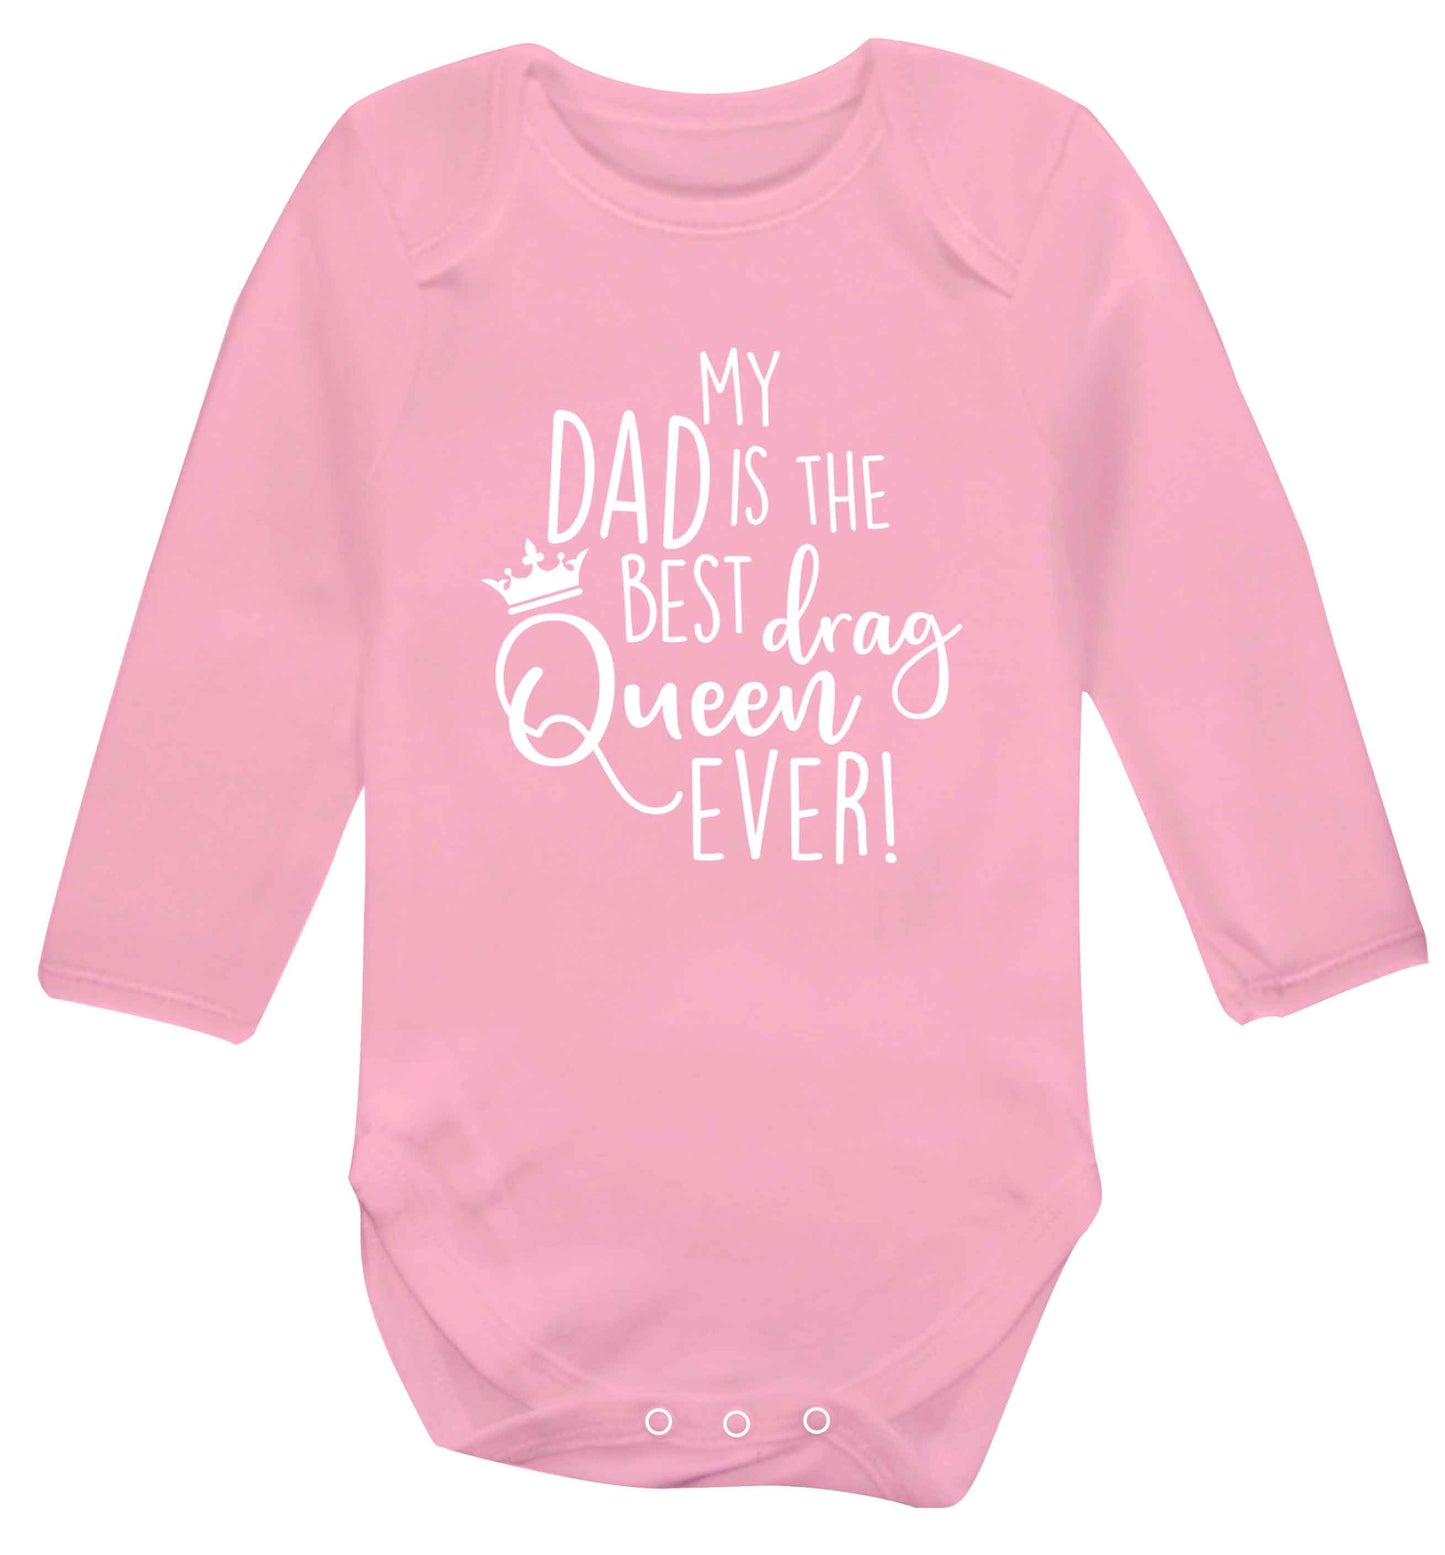 My dad is the best drag Queen ever Baby Vest long sleeved pale pink 6-12 months